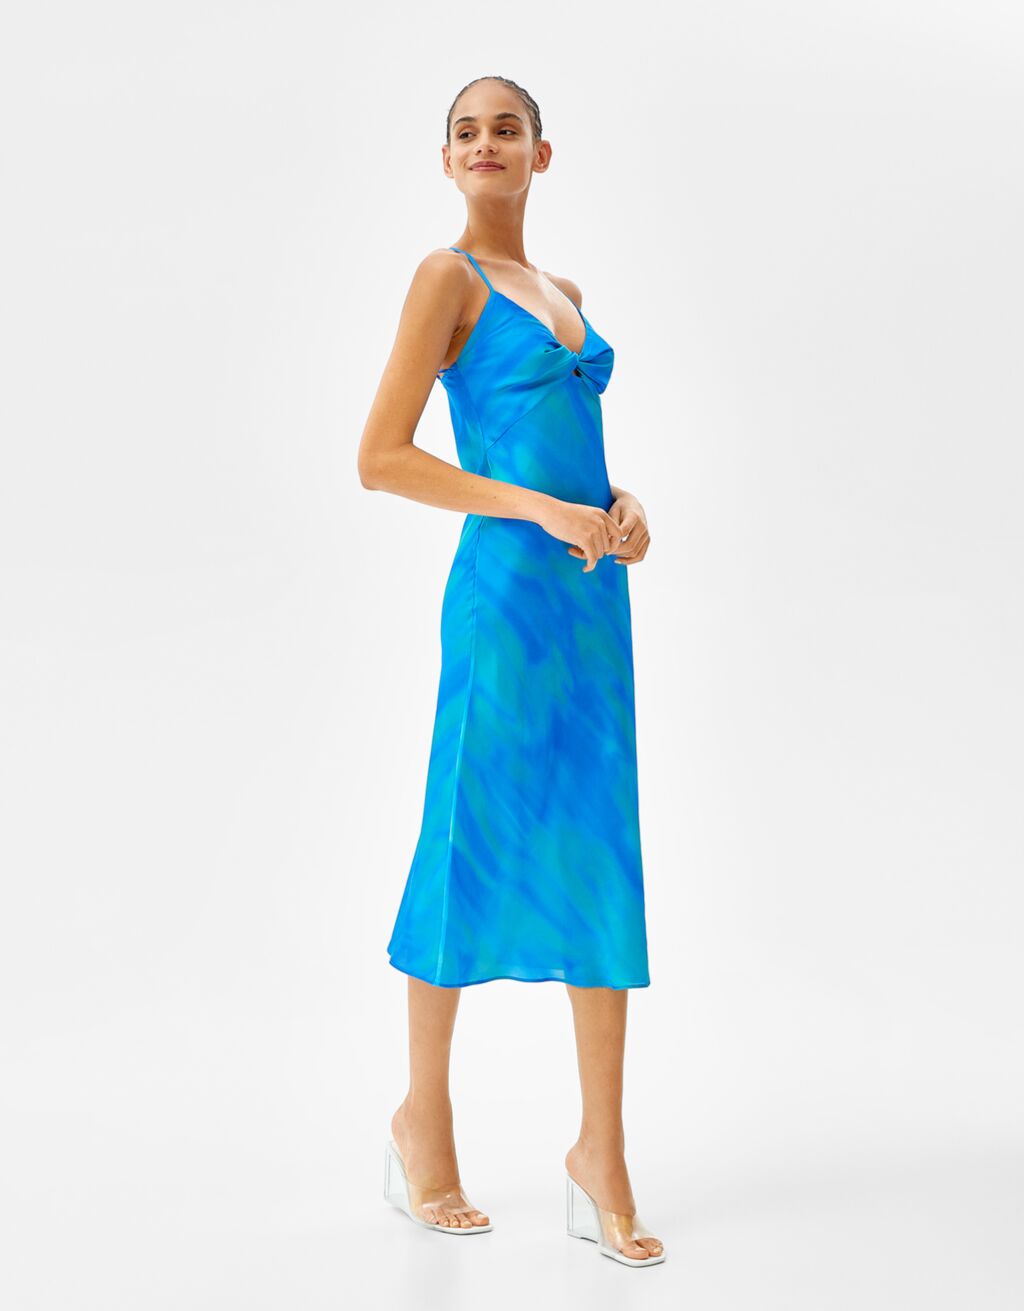 Strappy satin dress with a print and neckline